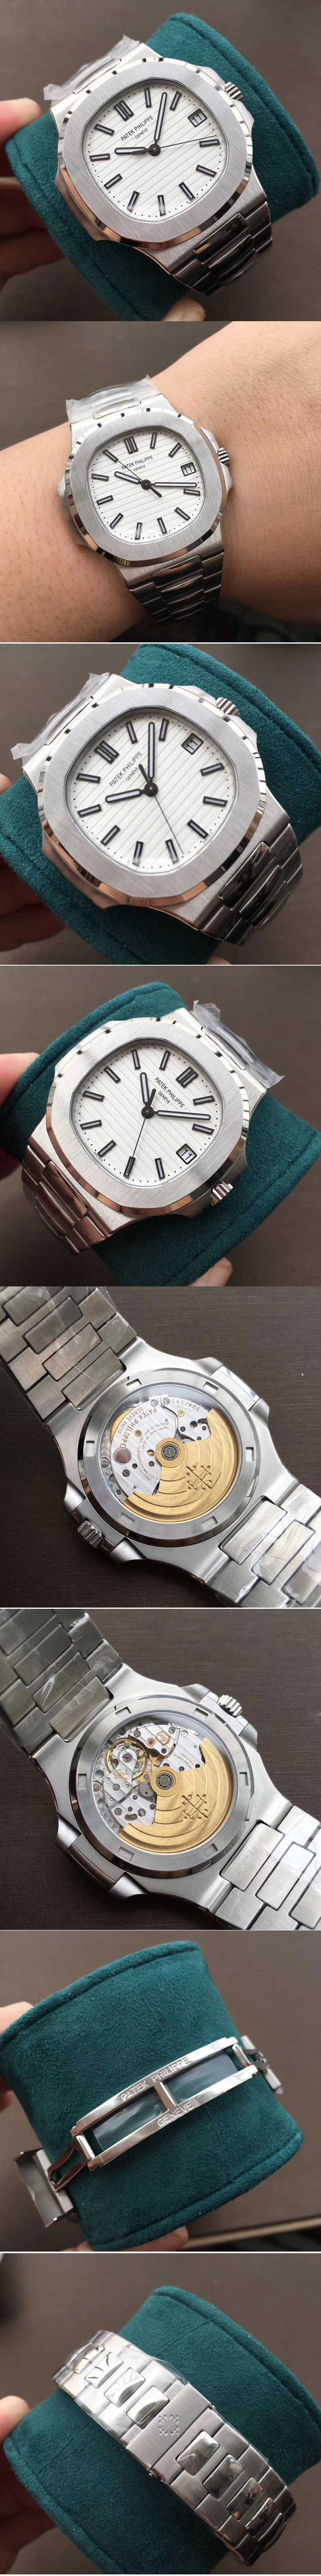 Replica Patek Philippe Nautilus 5711/1A 3KF 1:1 Best Edition White Textured Dial on SS Bracelet A324 Super Clone